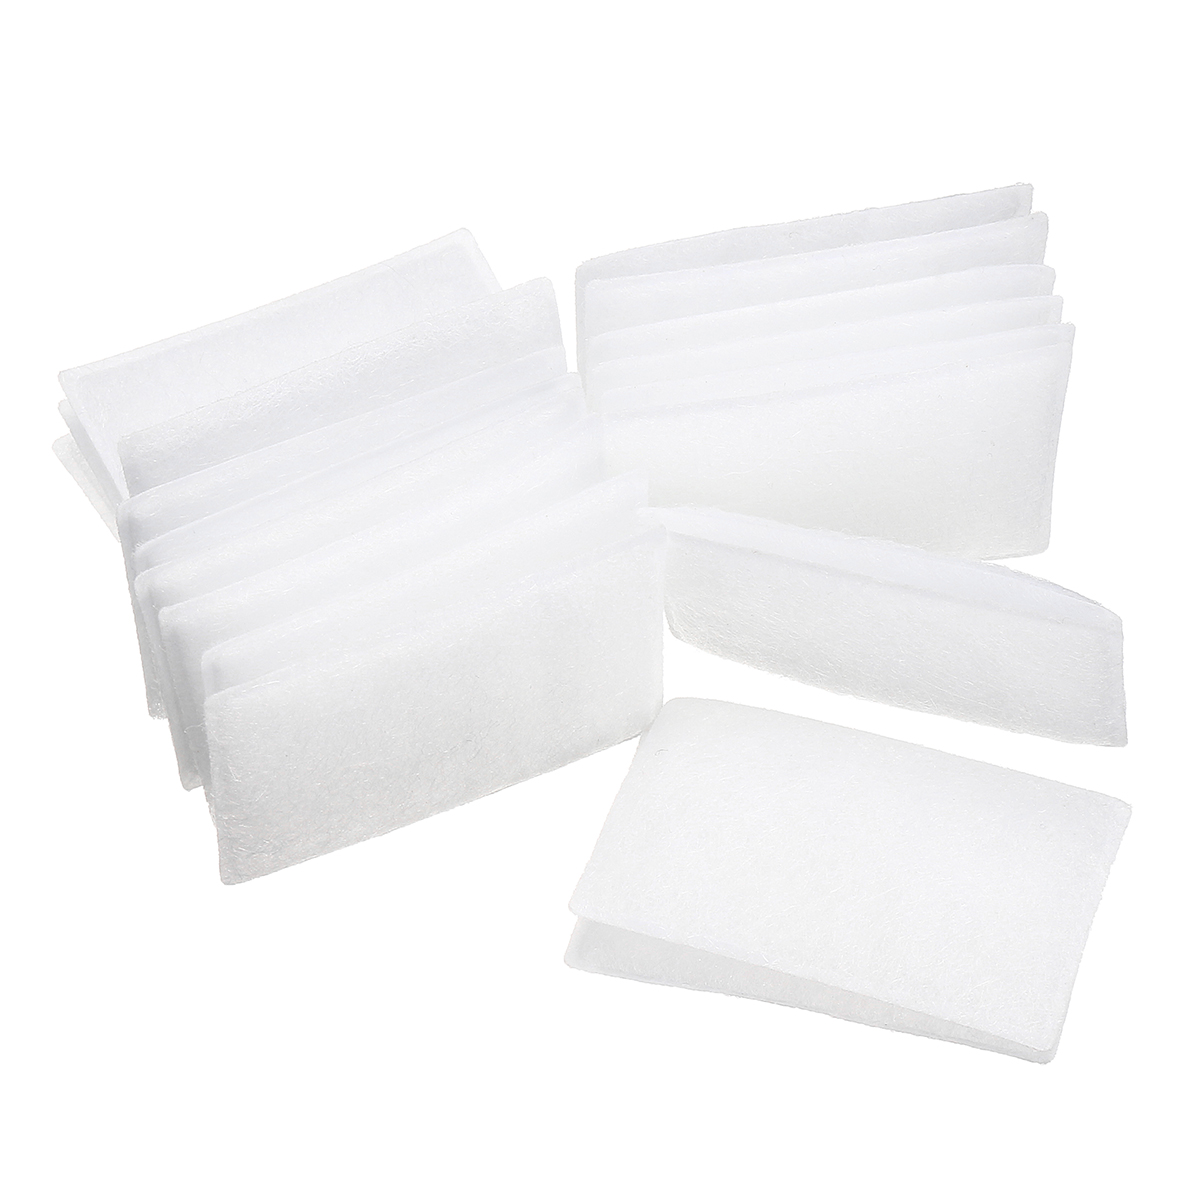 20pcs-Disposable-Universal-Replacement-Filter-For-S9S10-ResMed-AirSense-1363620-2